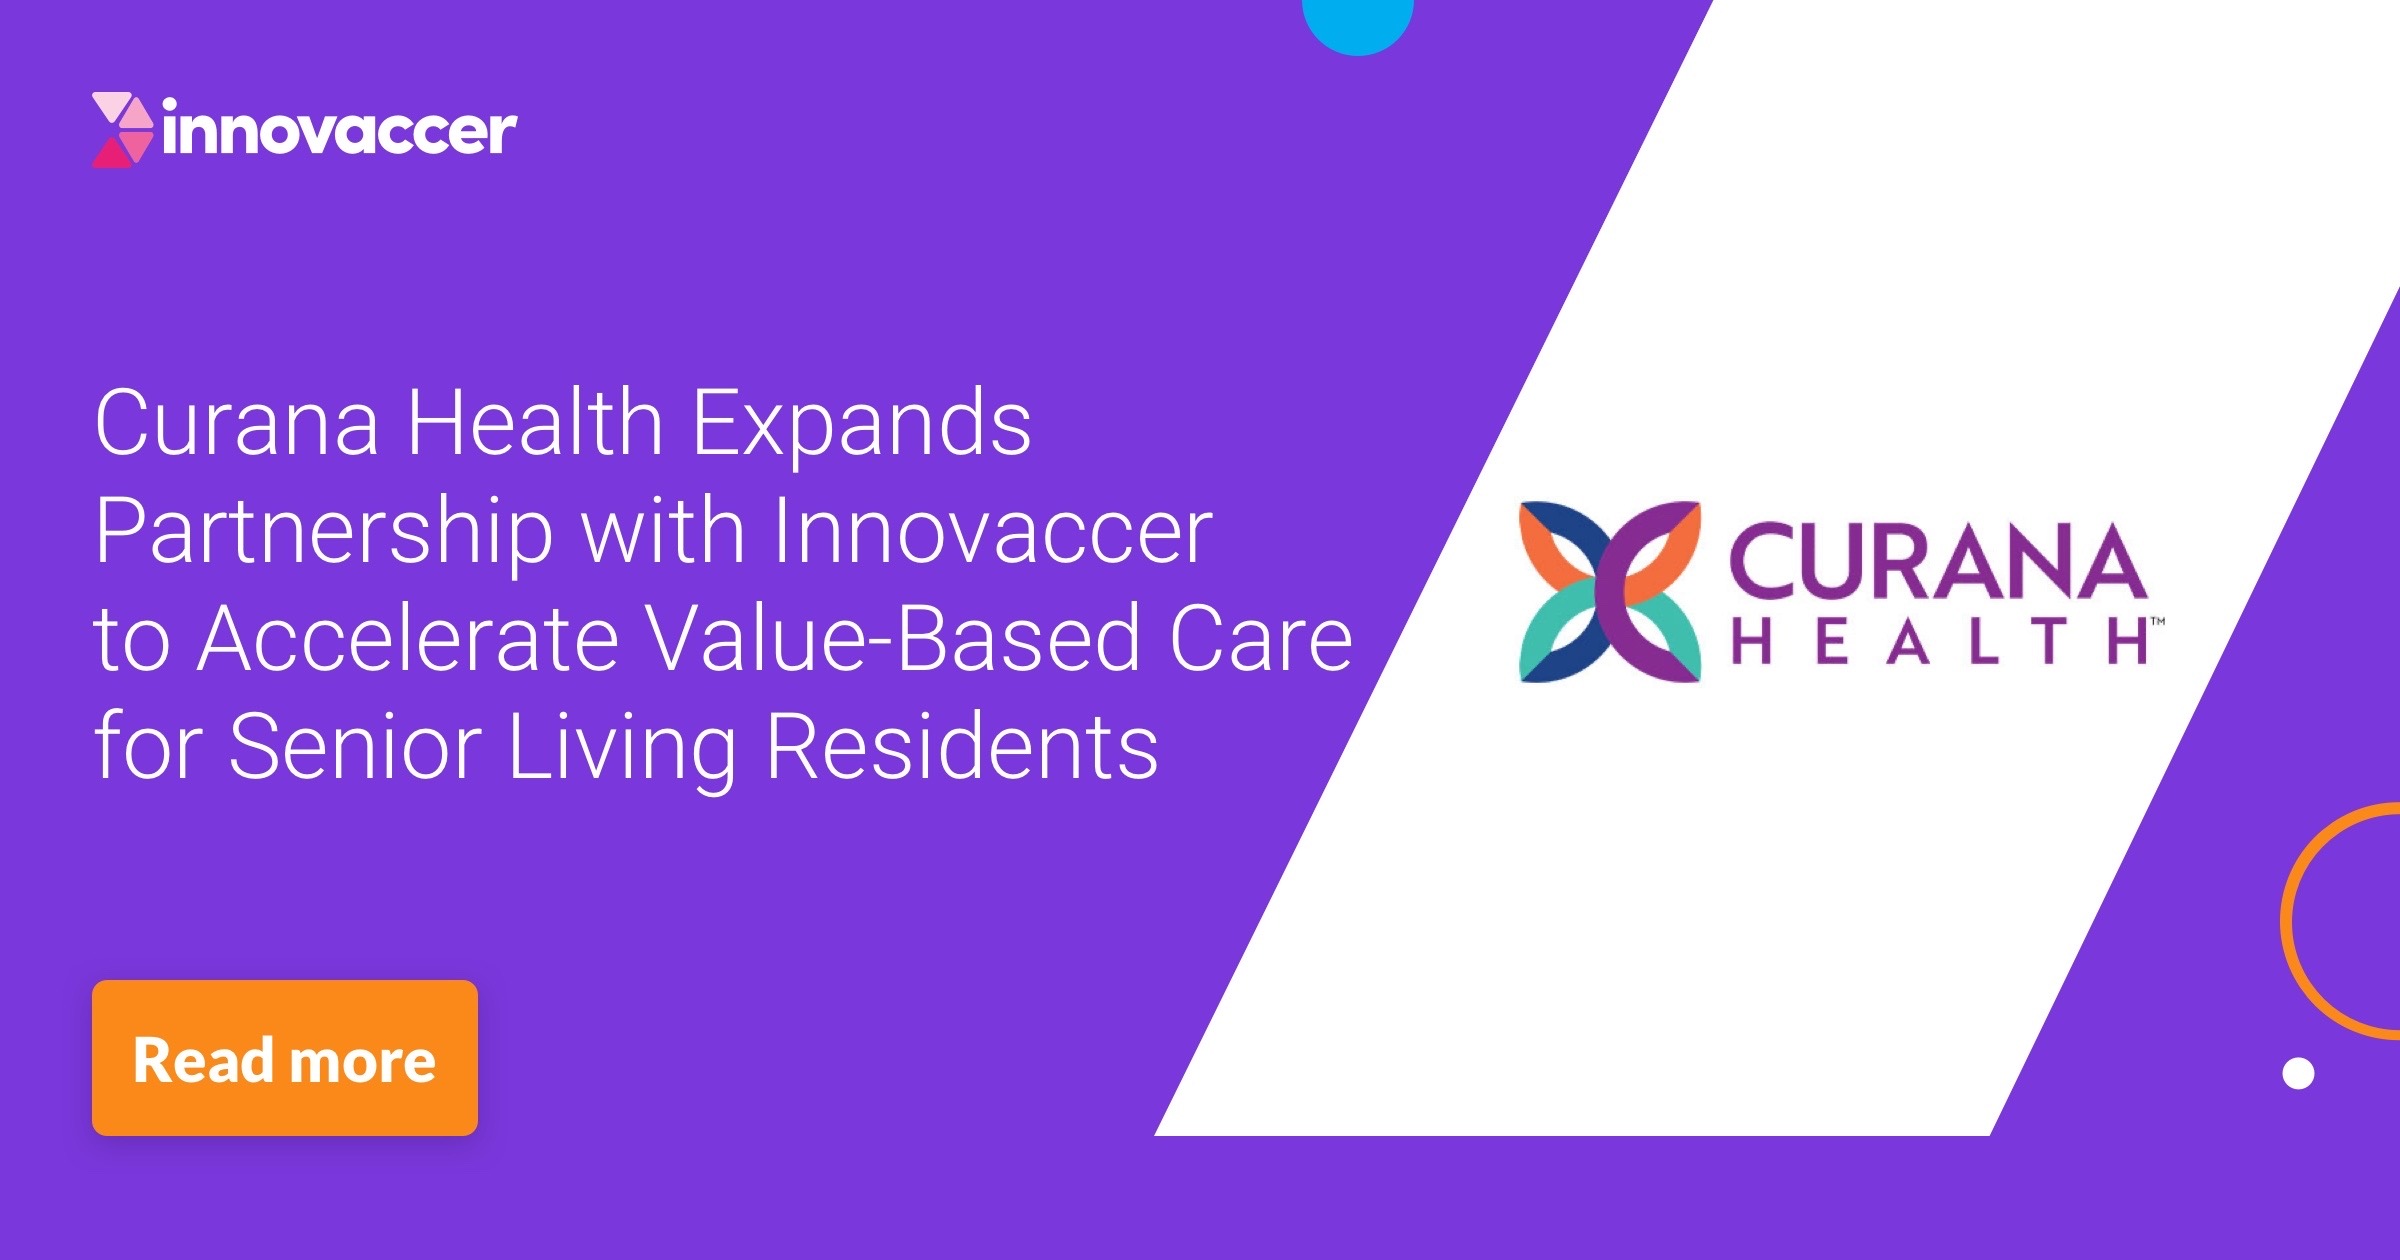 Curana Health, Innovaccer Partner to Accelerate Value-Based Care For Seniors